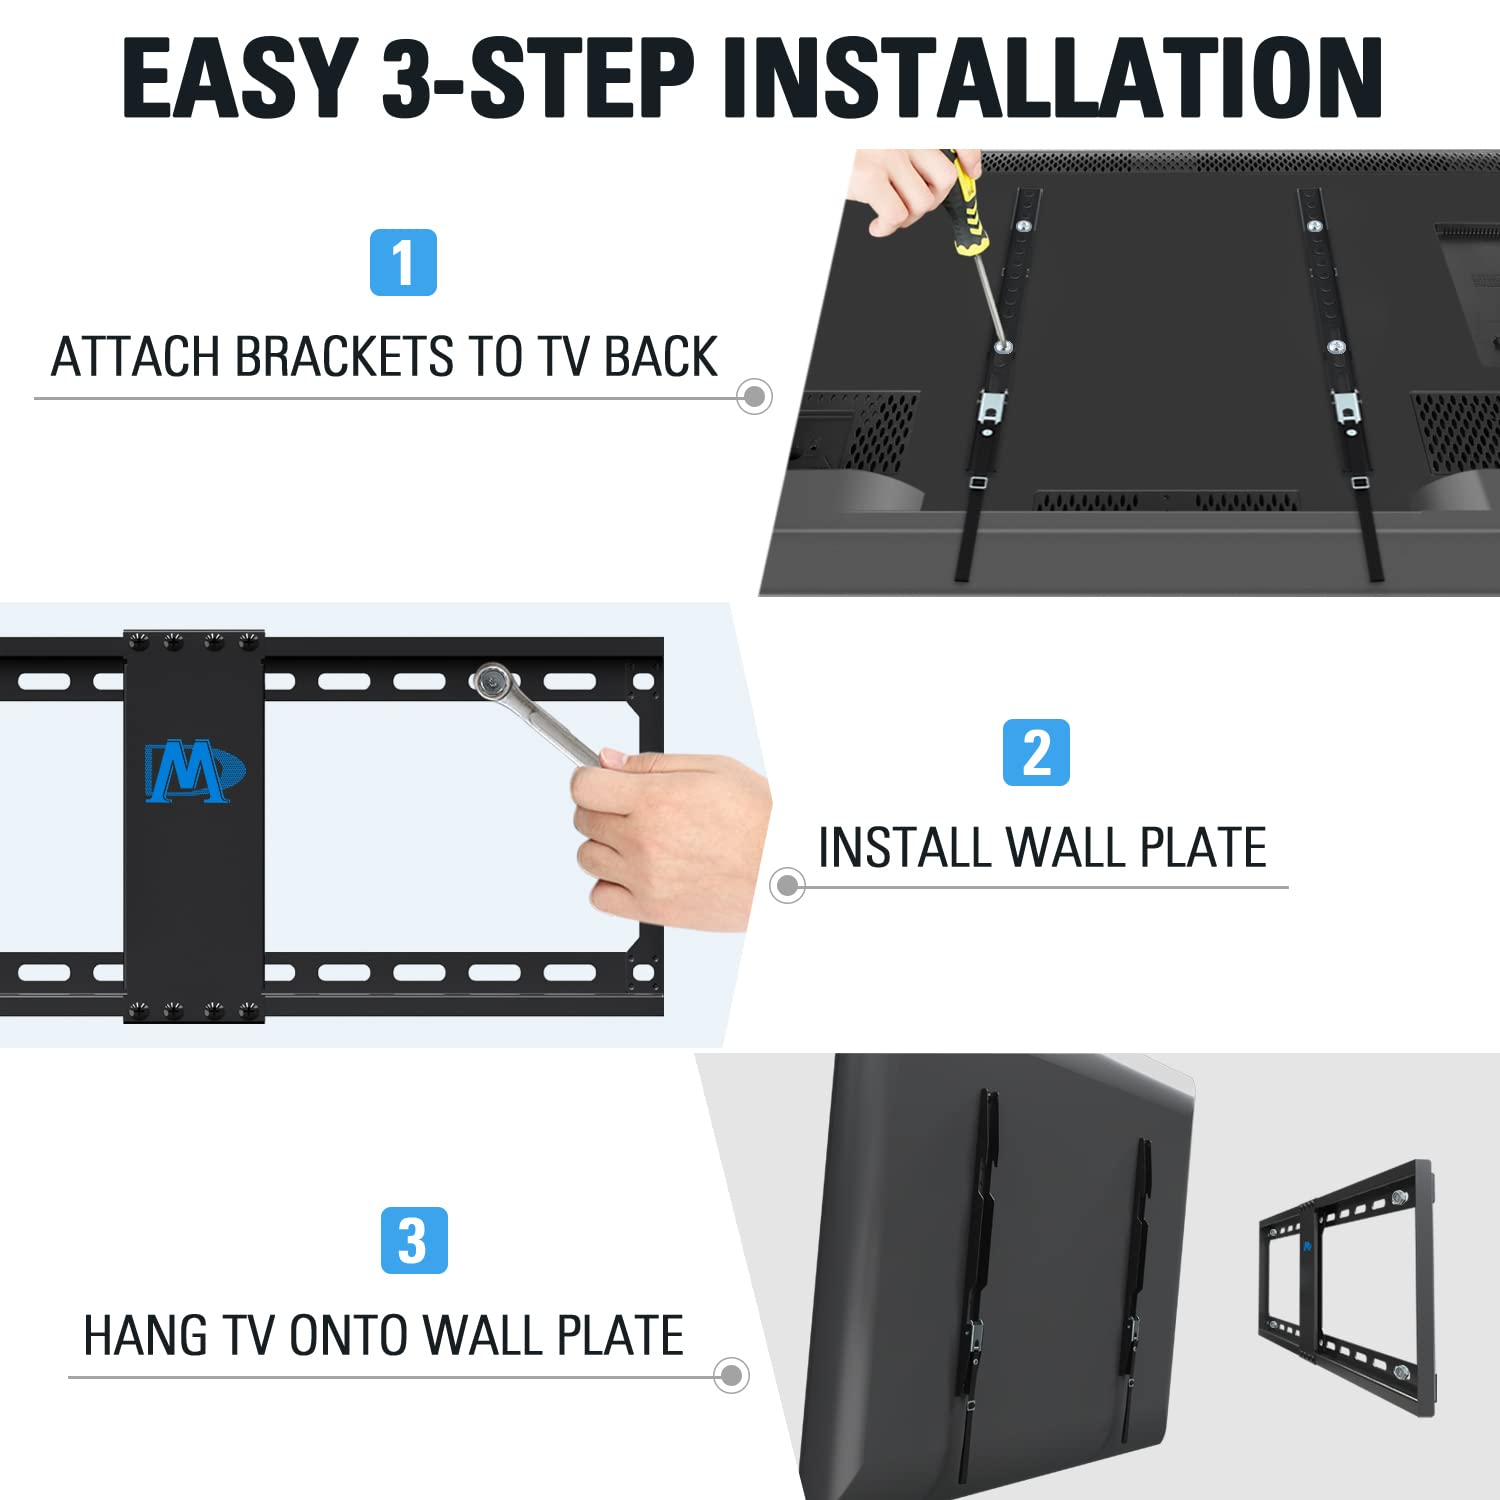 Mounting Dream TV Mount Fixed for Most 42-84 Inch Flat Screen TVs, TV Wall Mount Bracket up to VESA 600 x 400mm and 132 lbs - Fits 16